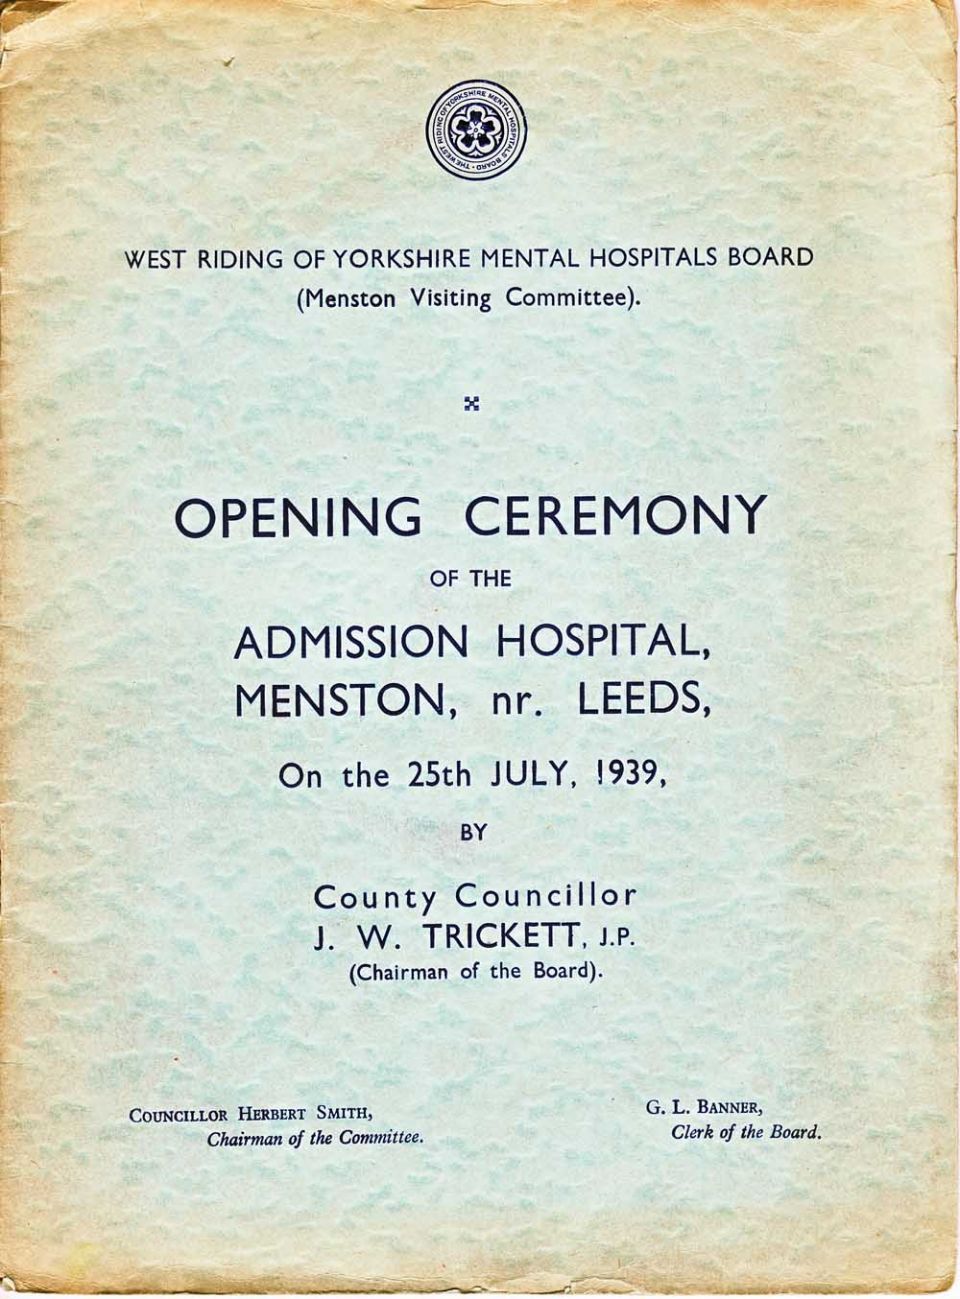 A Grand Opening Ceremony, Front Cover 25th July 1939 sm.jpg